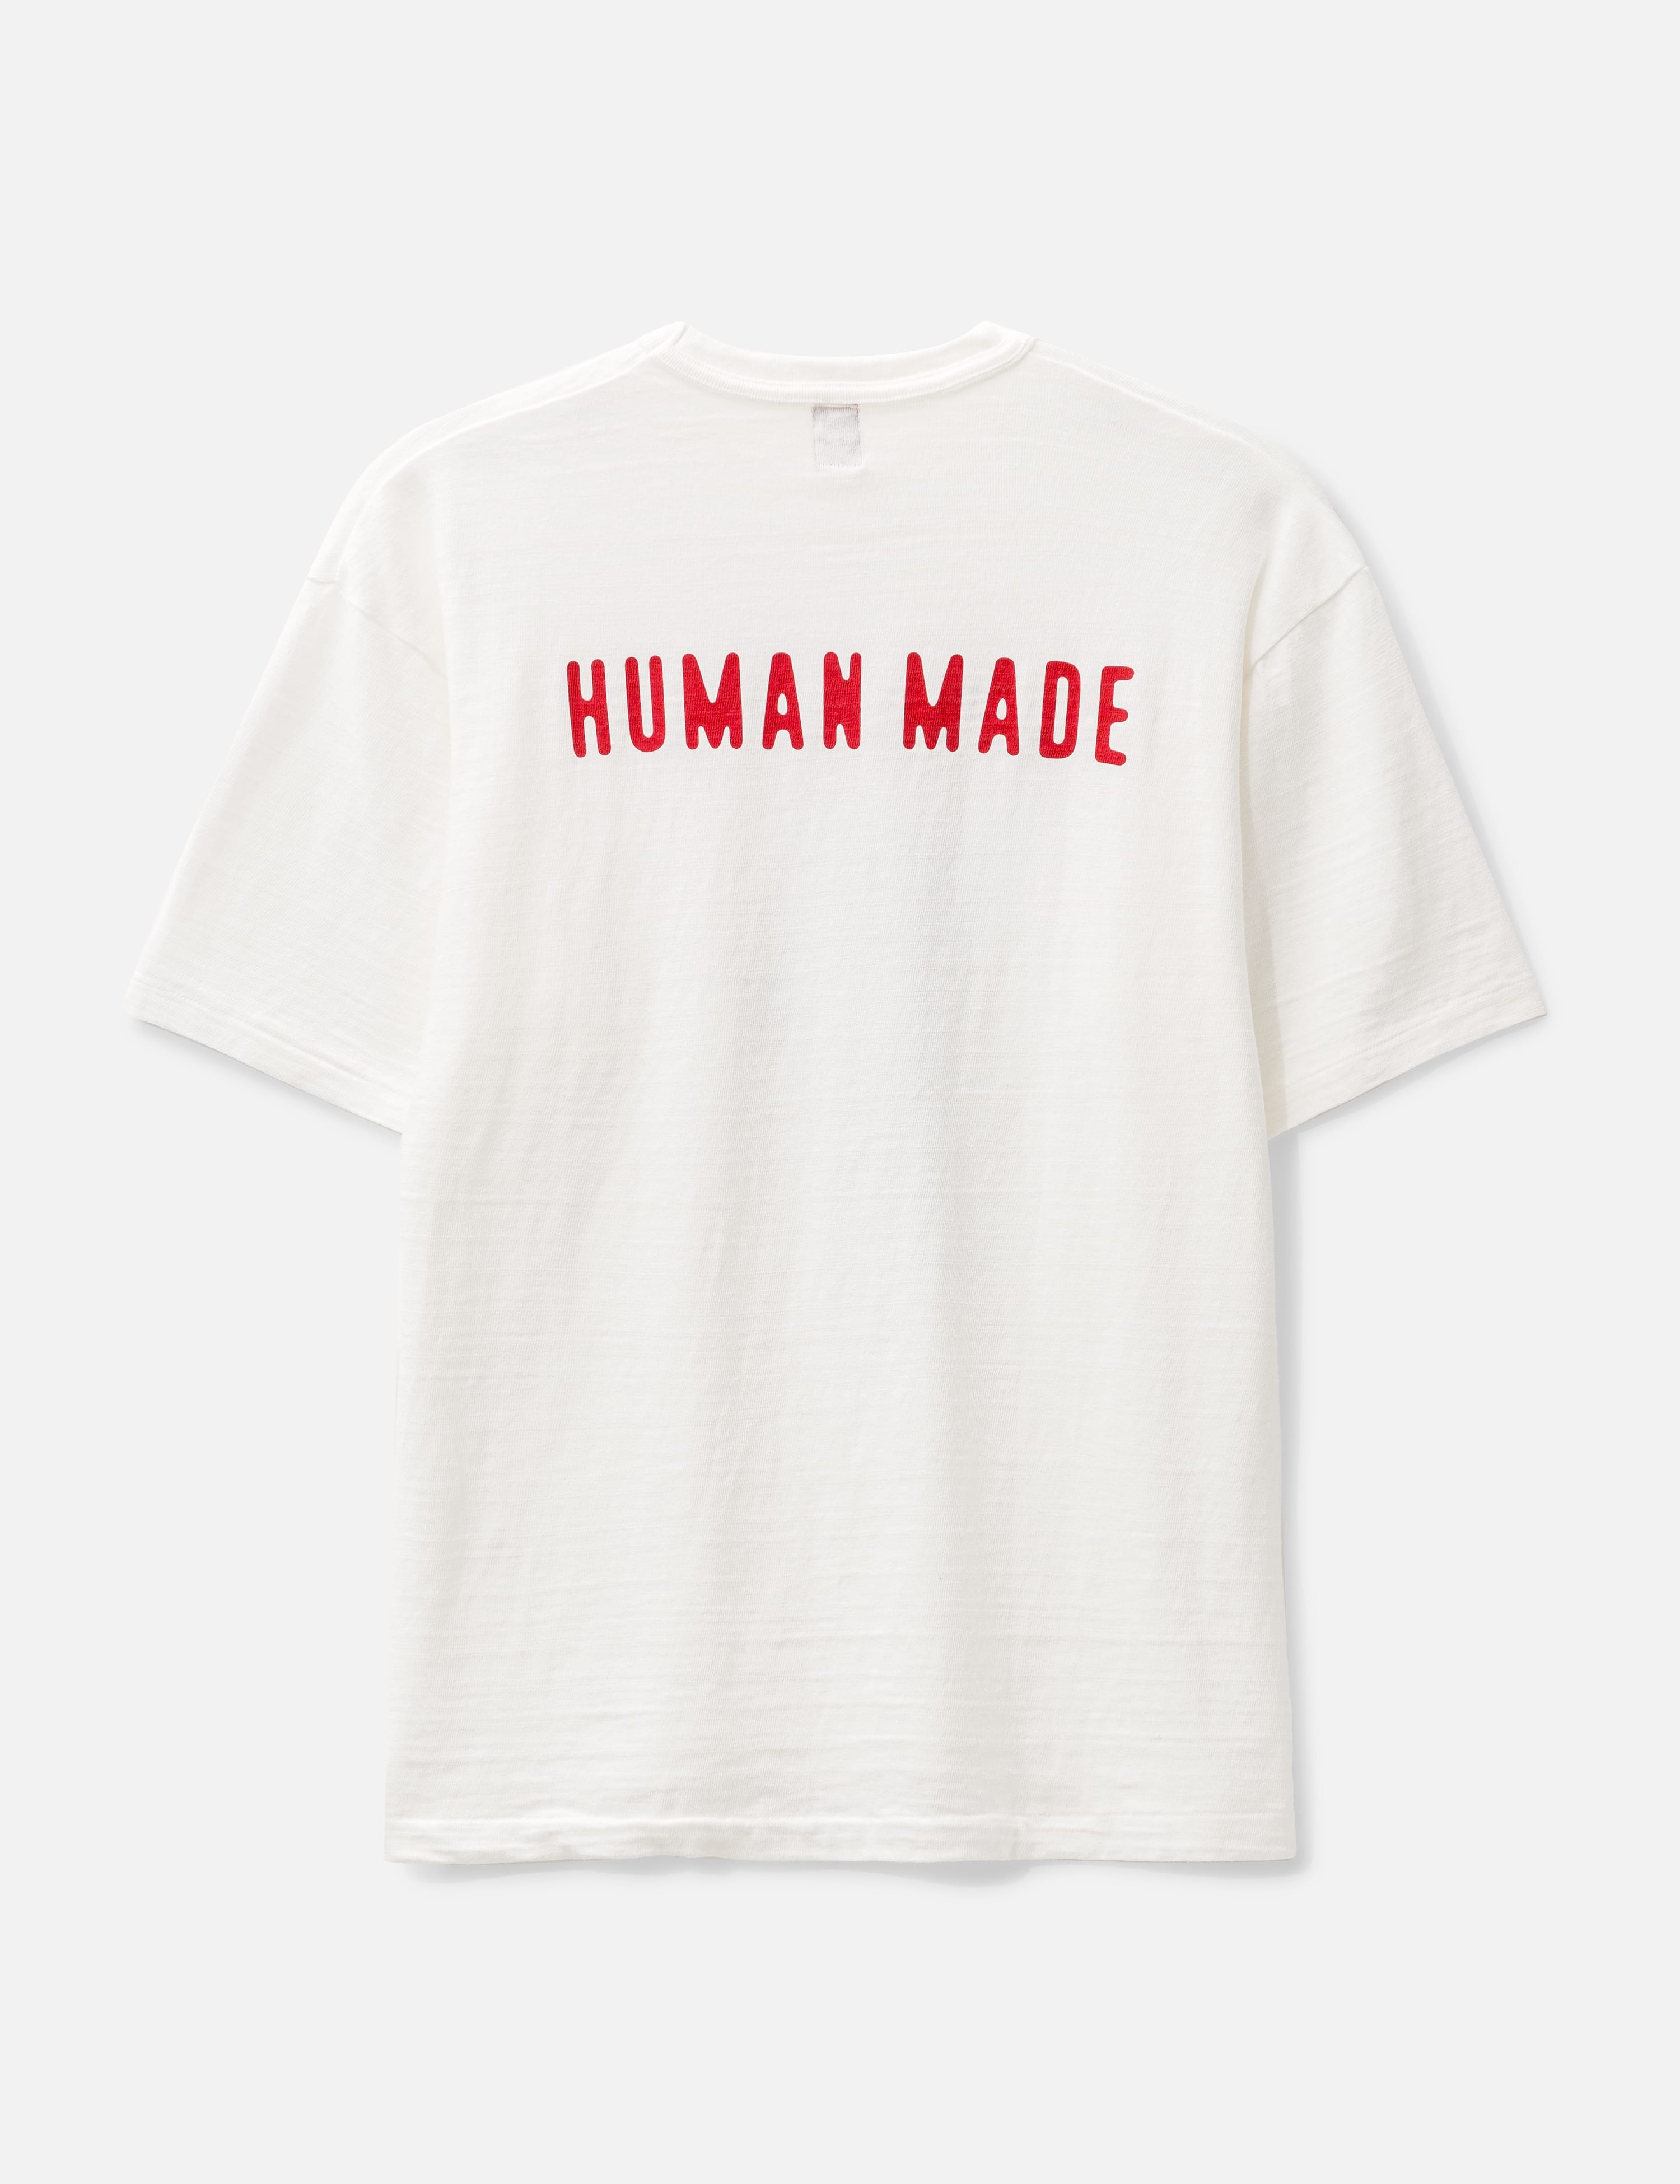 Human Made - GRAPHIC T-SHIRT #1 | HBX - Globally Curated